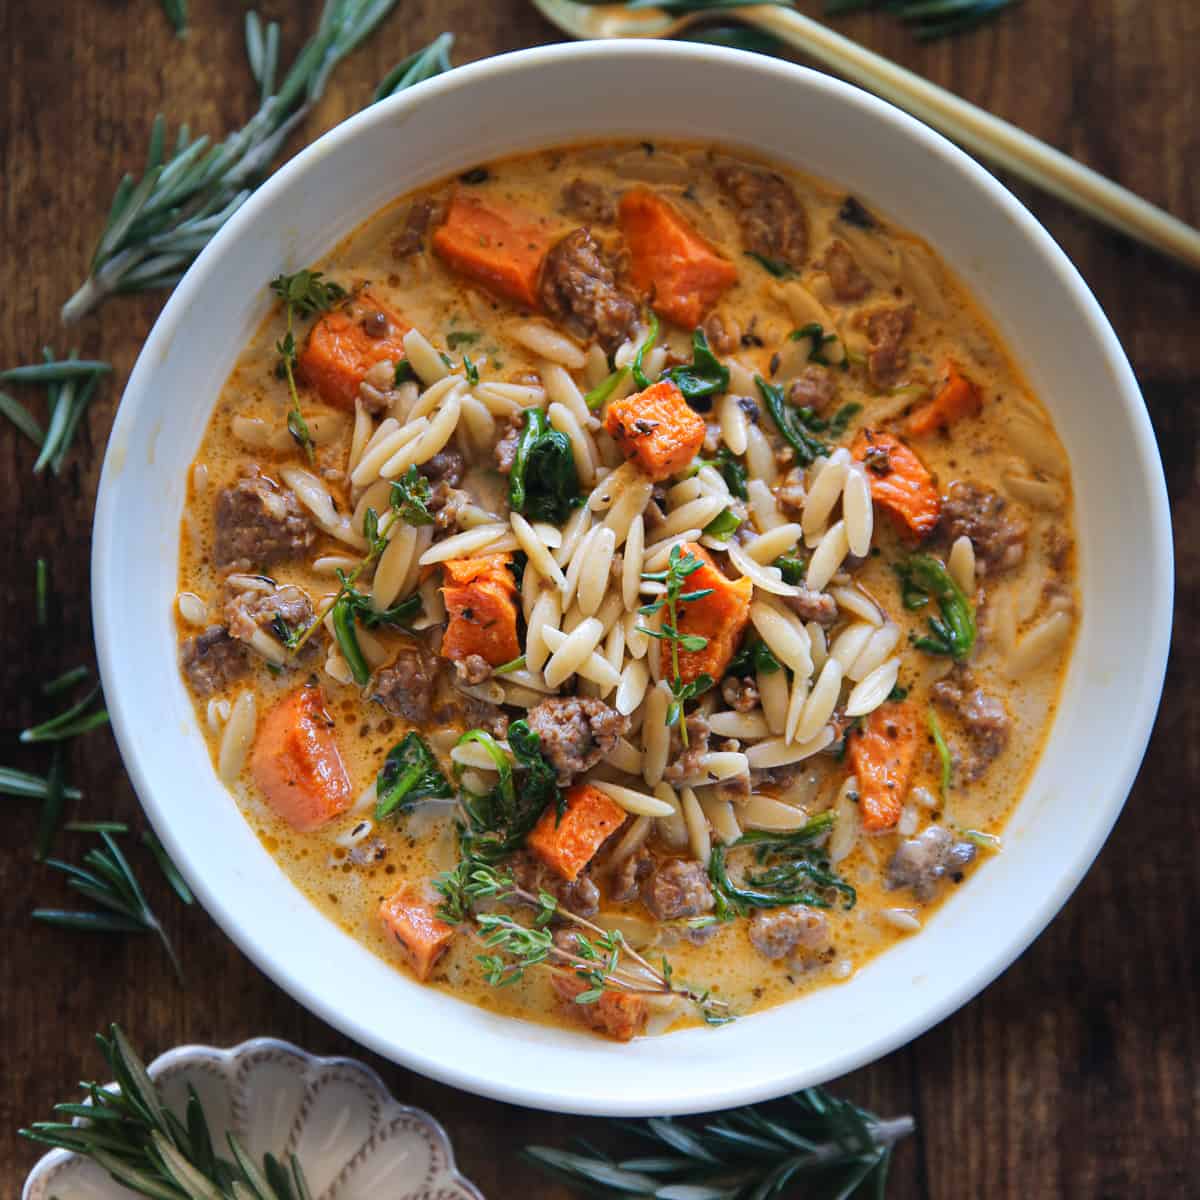 Creamy Butternut Squash and Sausage Soup with Orzo and Spinach in a white bowl.